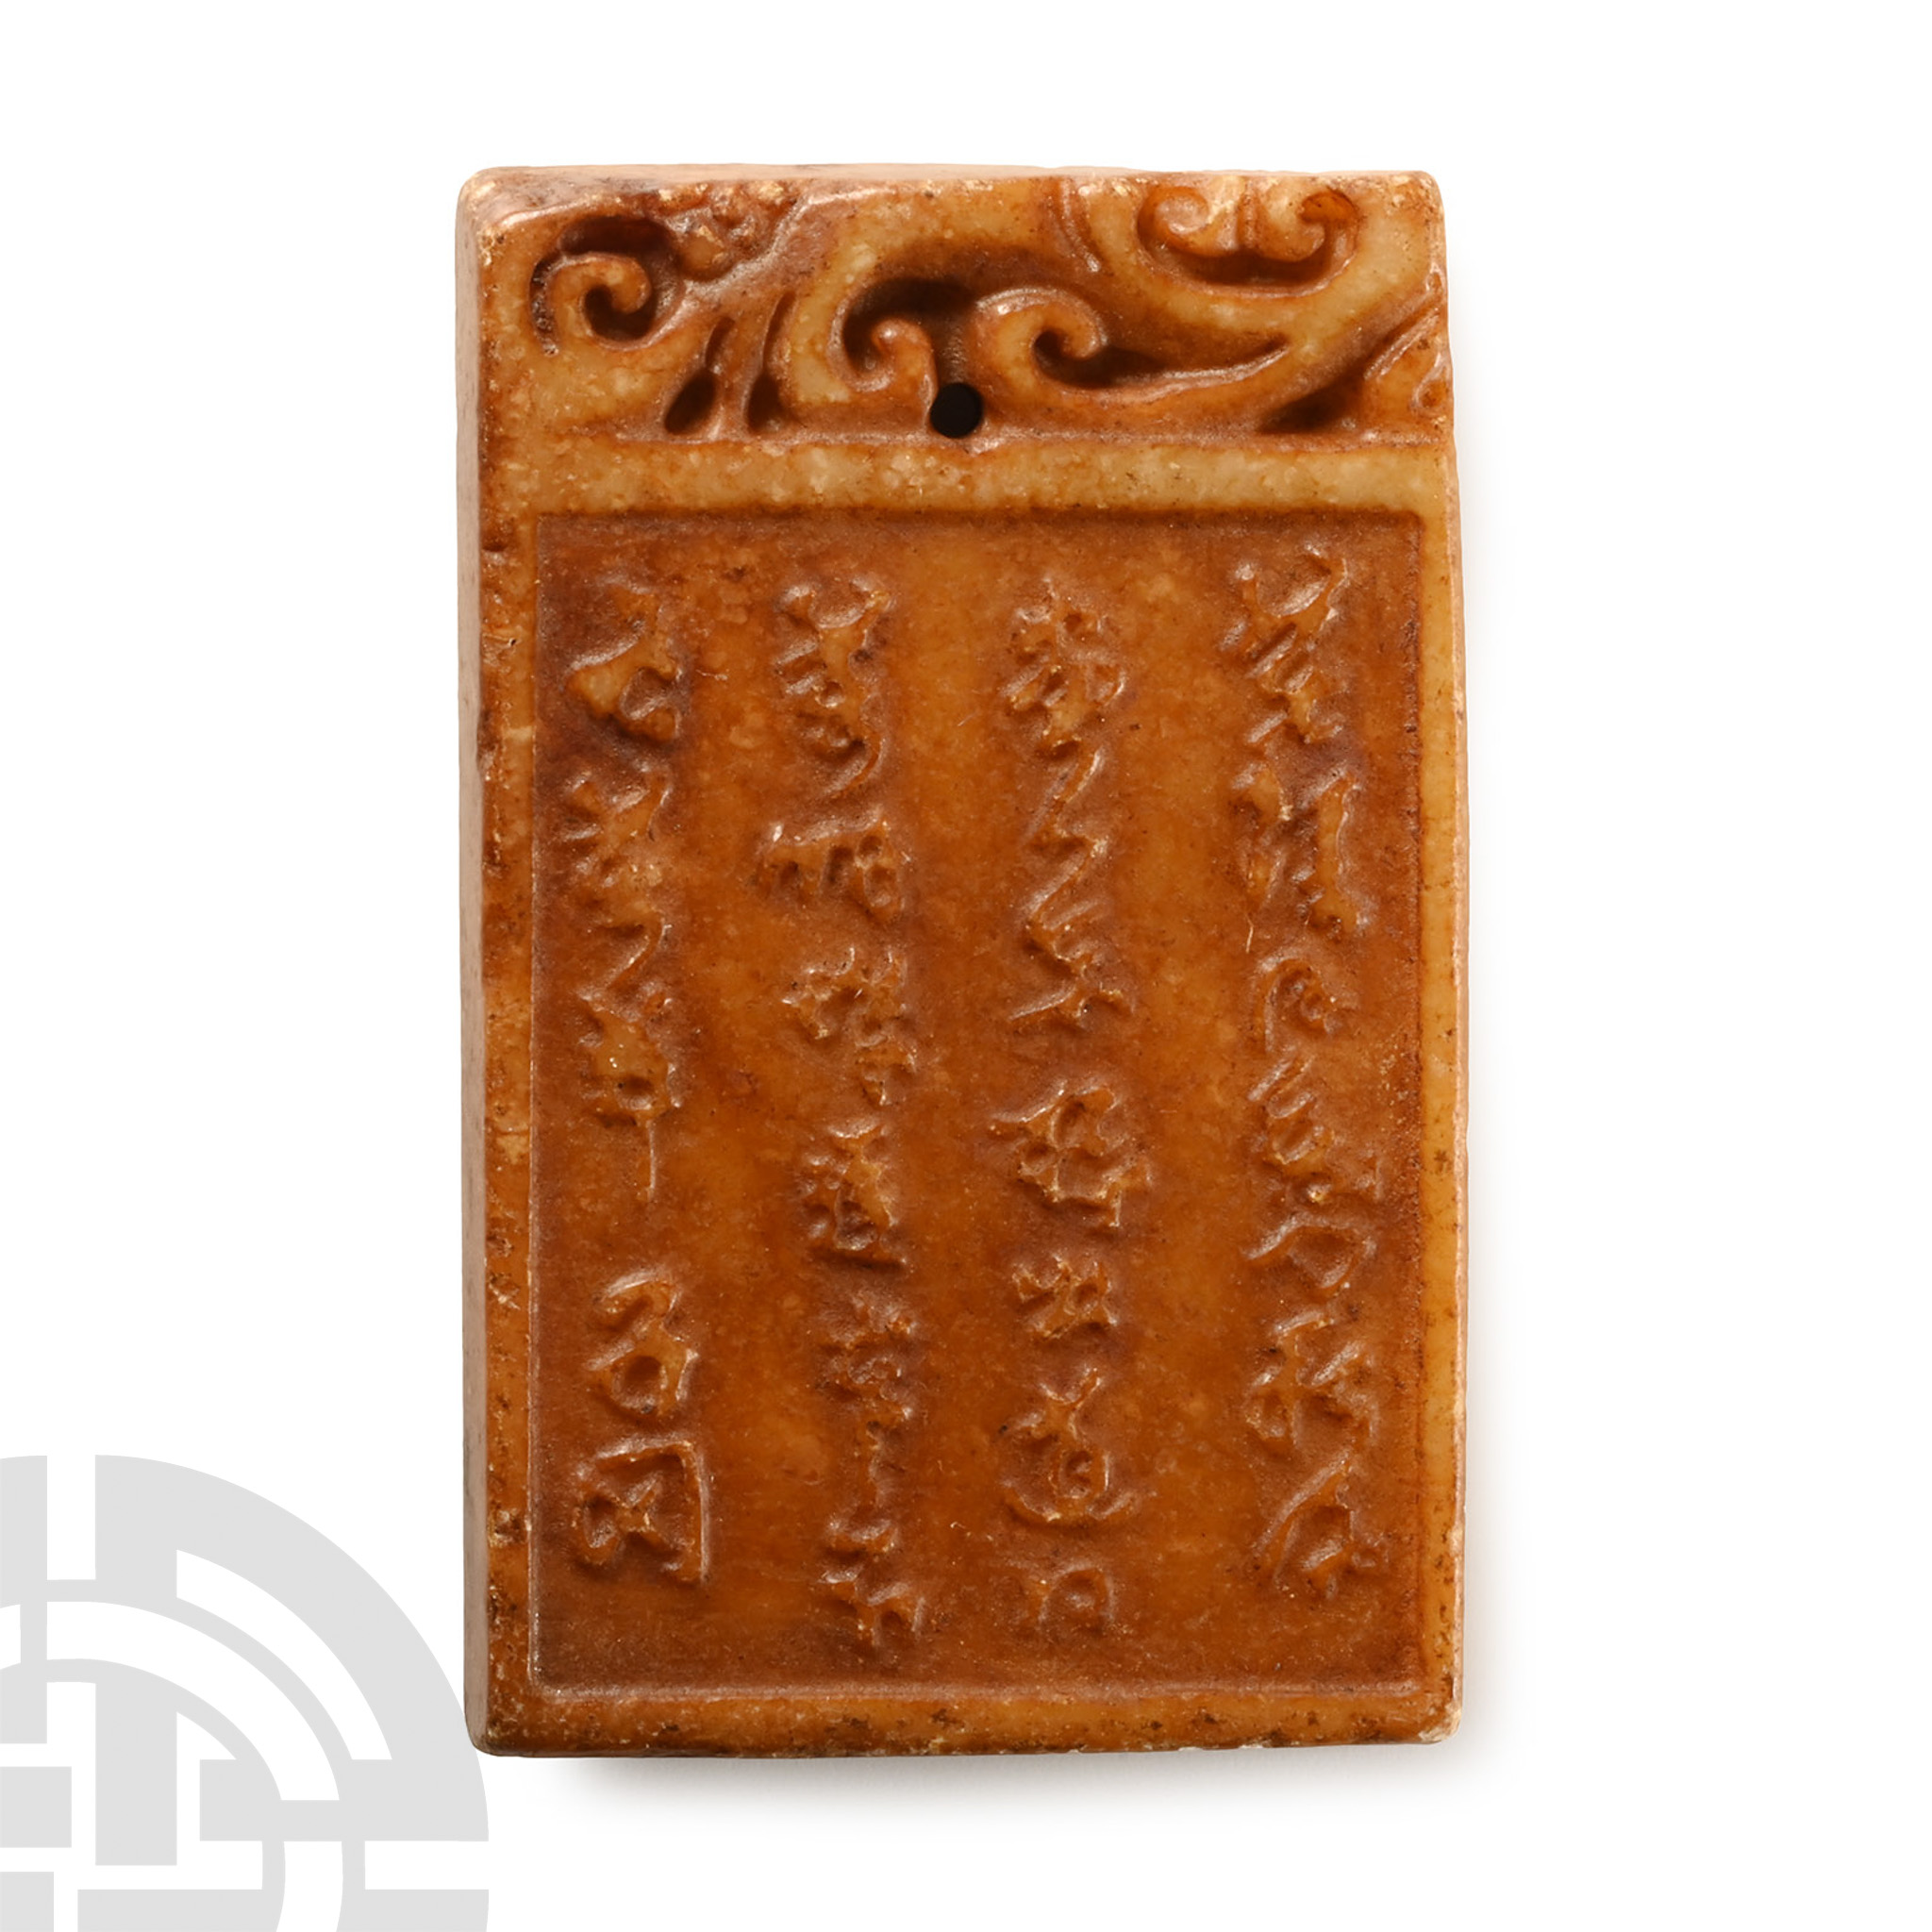 Chinese Carved Stone Plaque - Image 2 of 2